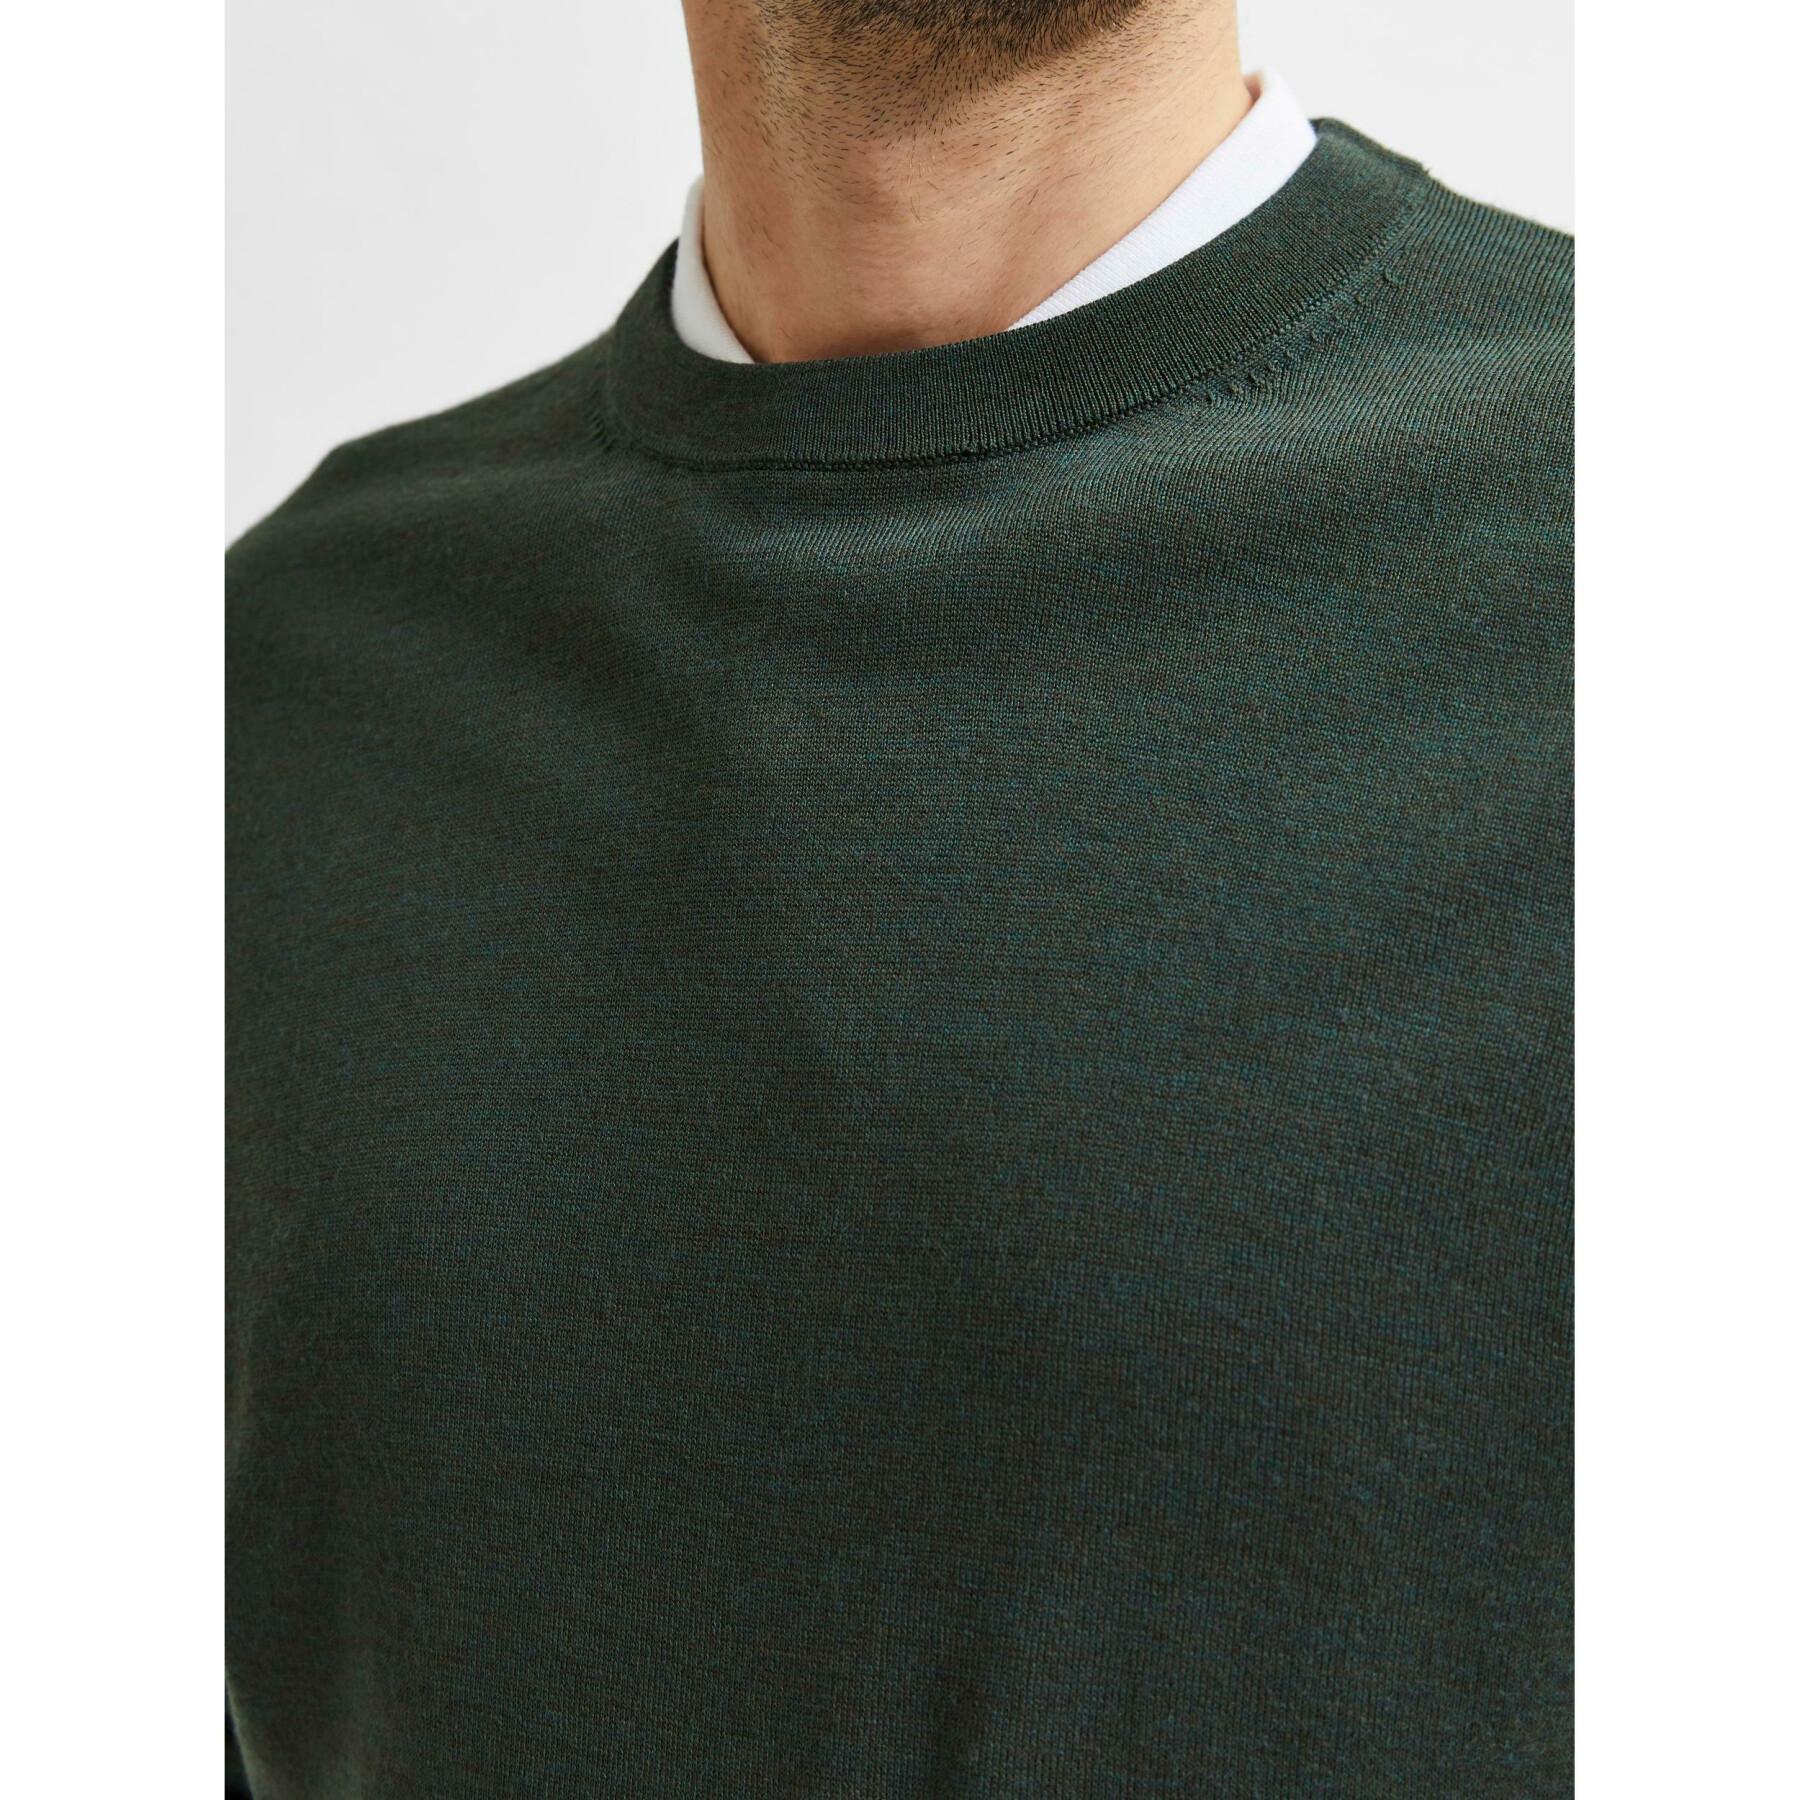 Jersey Selected Town merino coolmax knit col rond